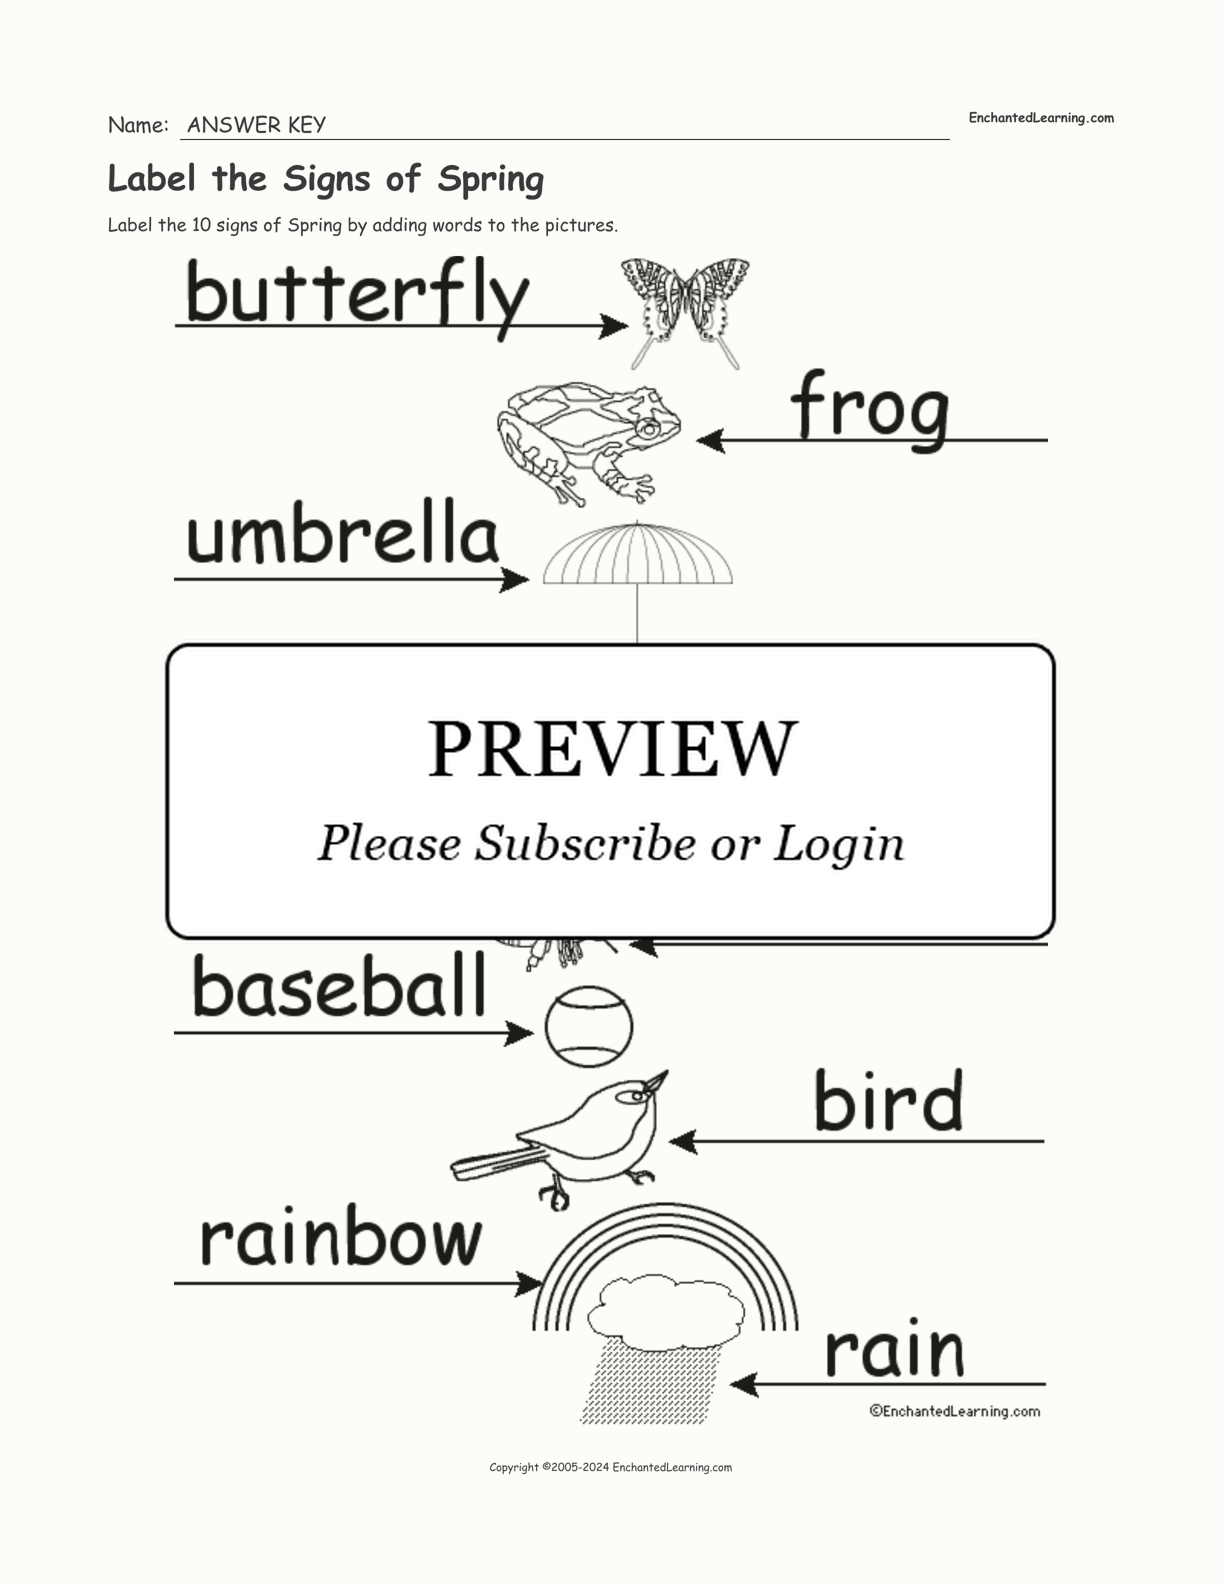 Label the Signs of Spring interactive worksheet page 2